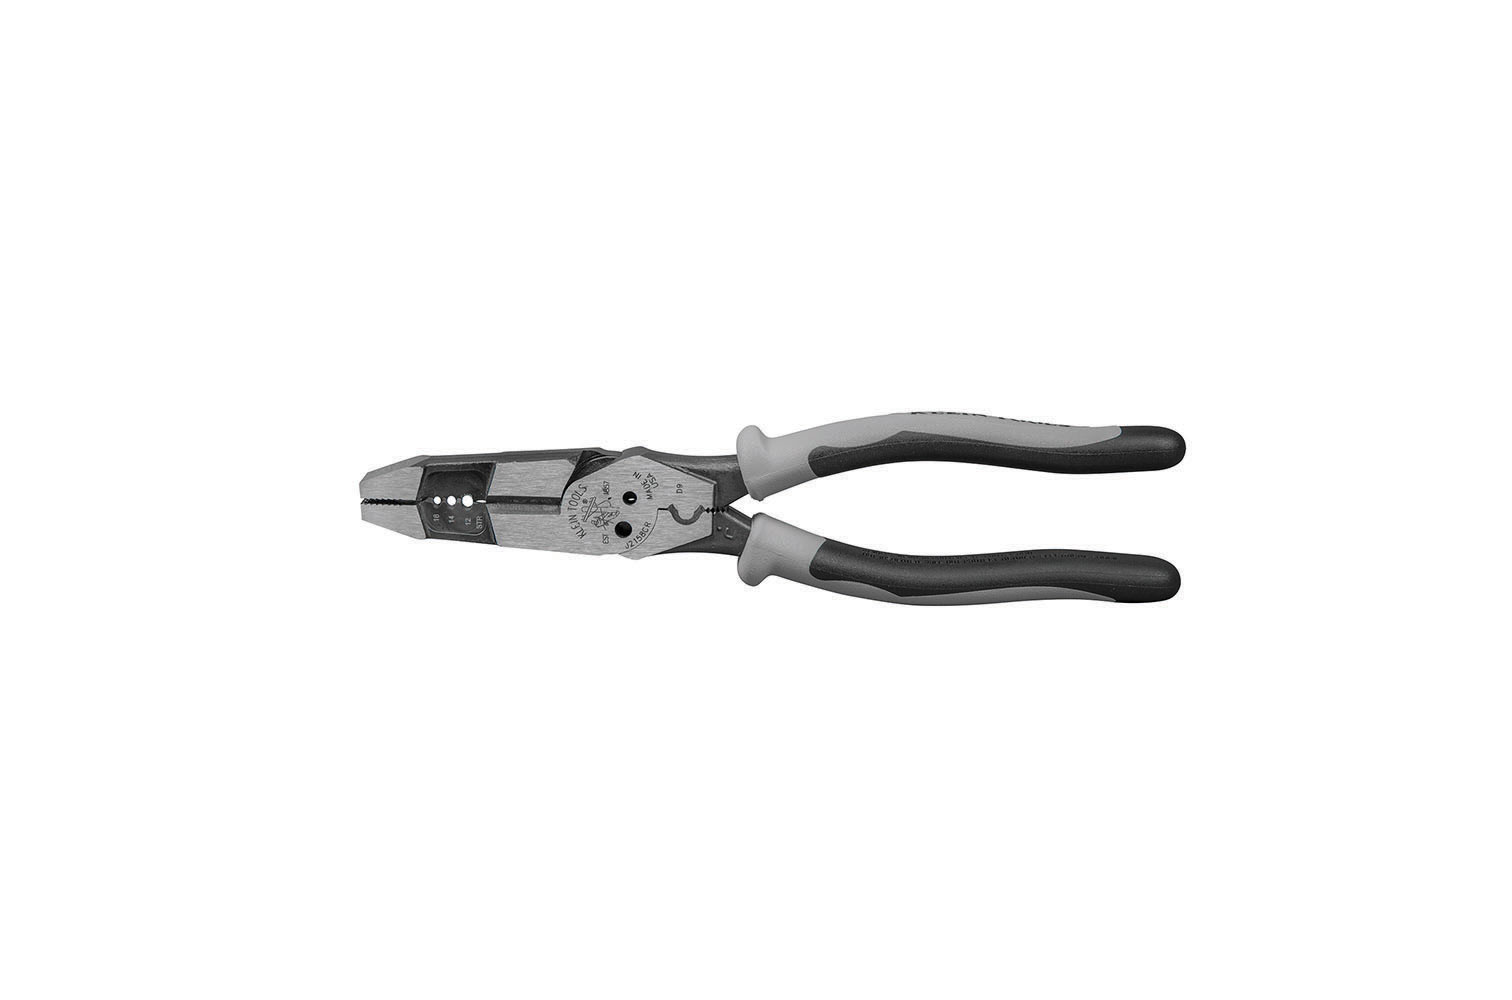 Klein Tools' Hybrid Pliers With Crimper